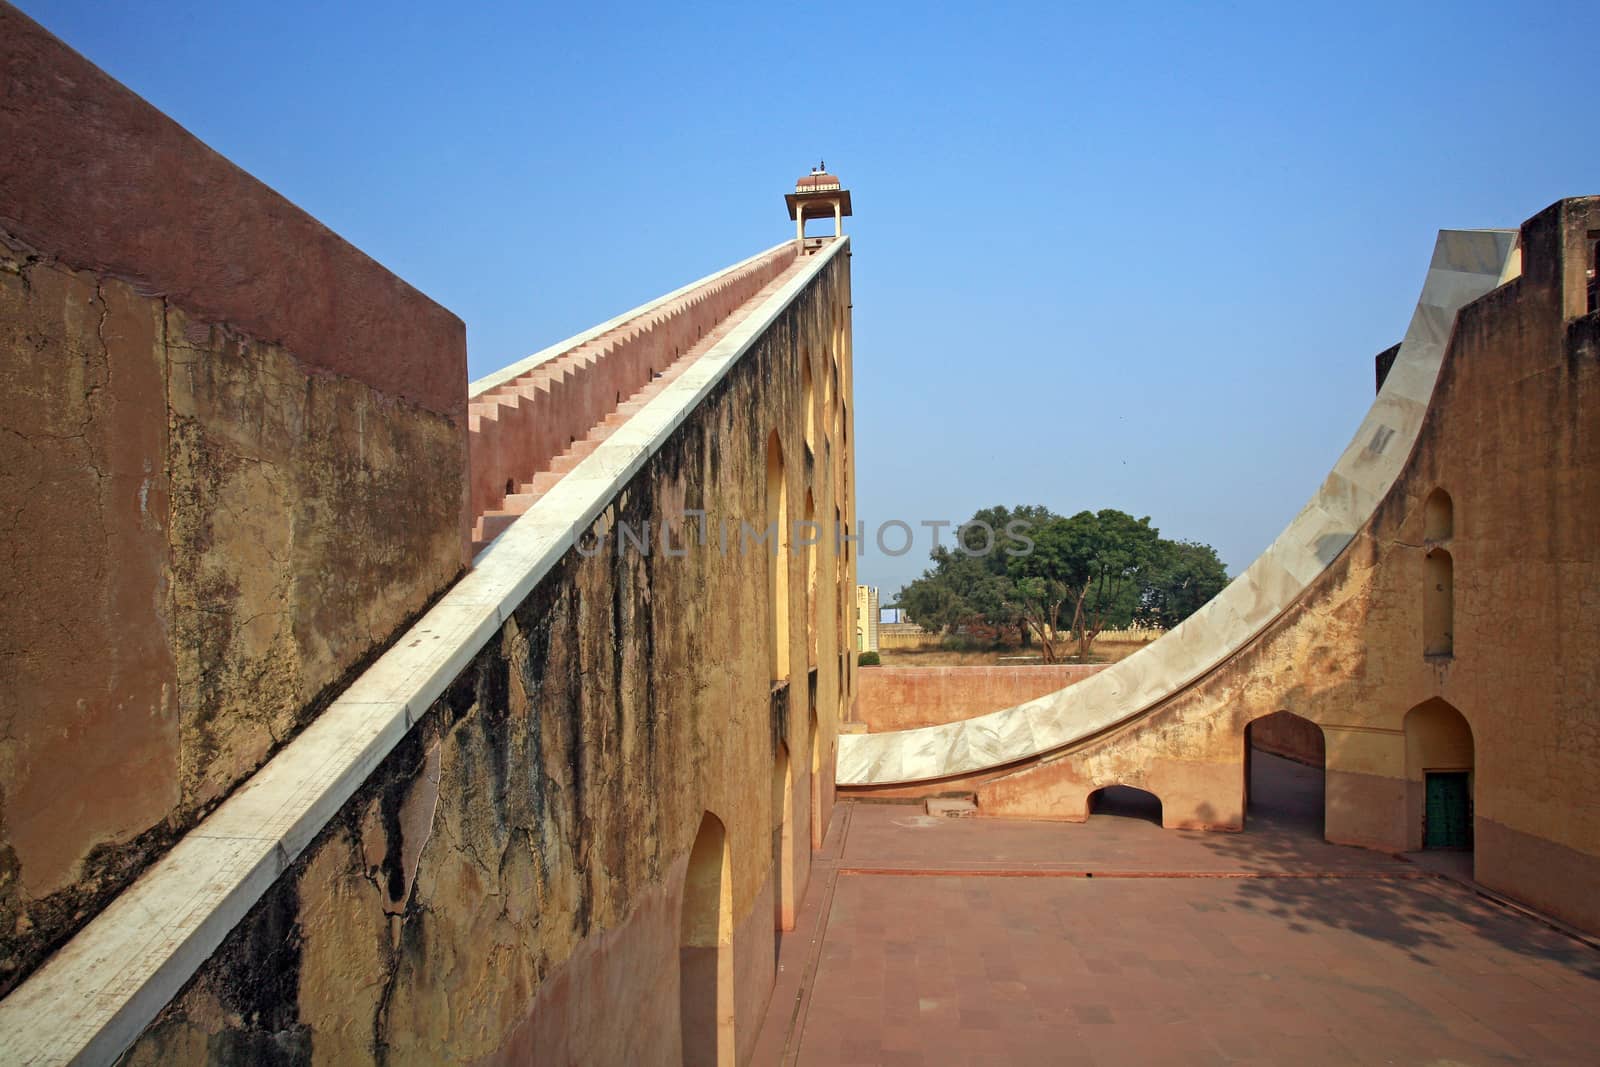 Astronomical instrument at Jantar Mantar observatory - Jaipur, R by think4photop